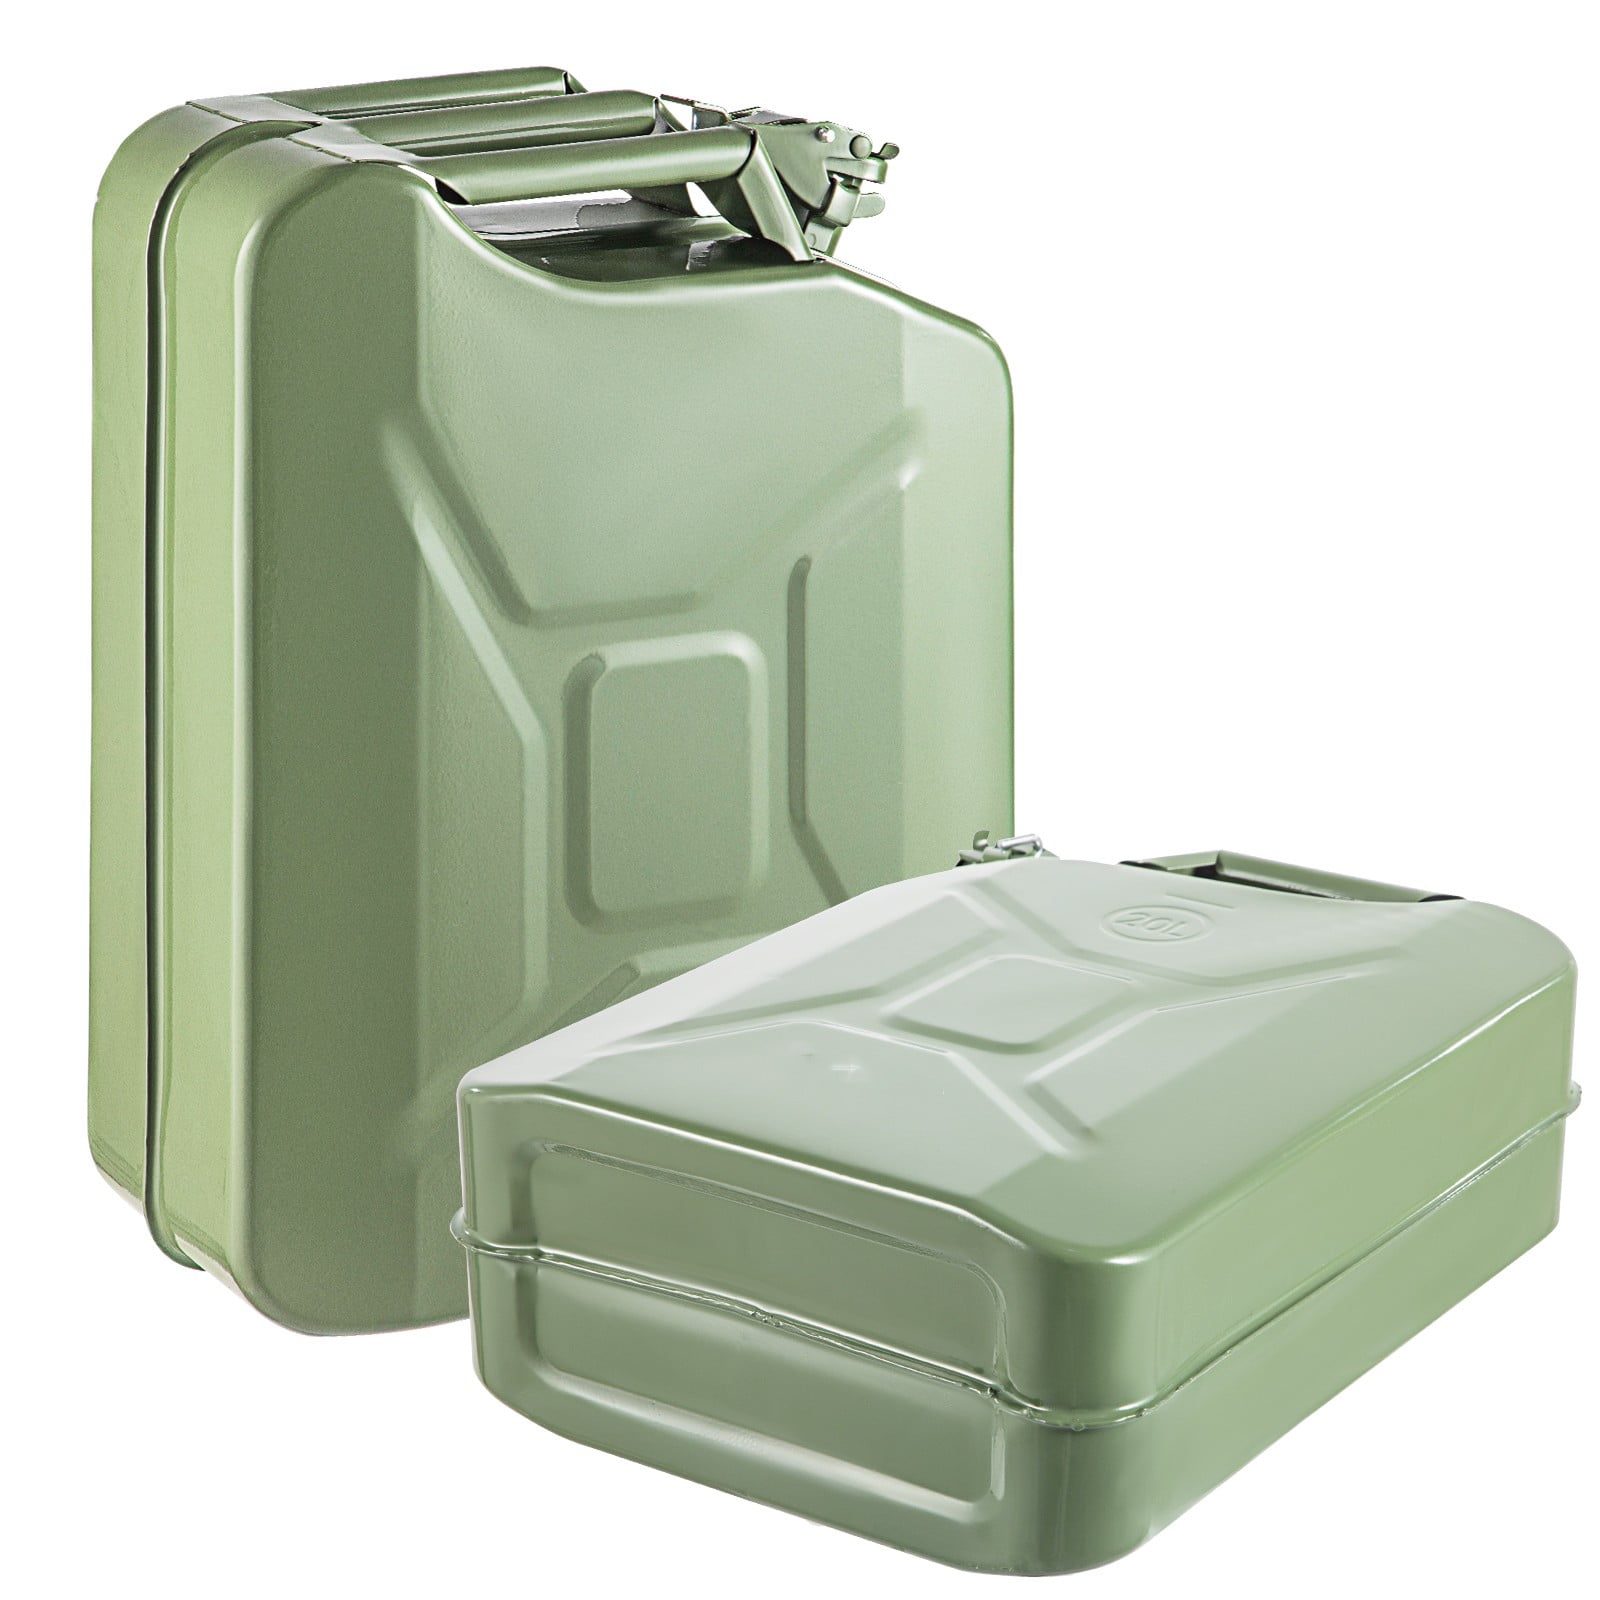 20 Liter Jerry Can - SINGLE CAN